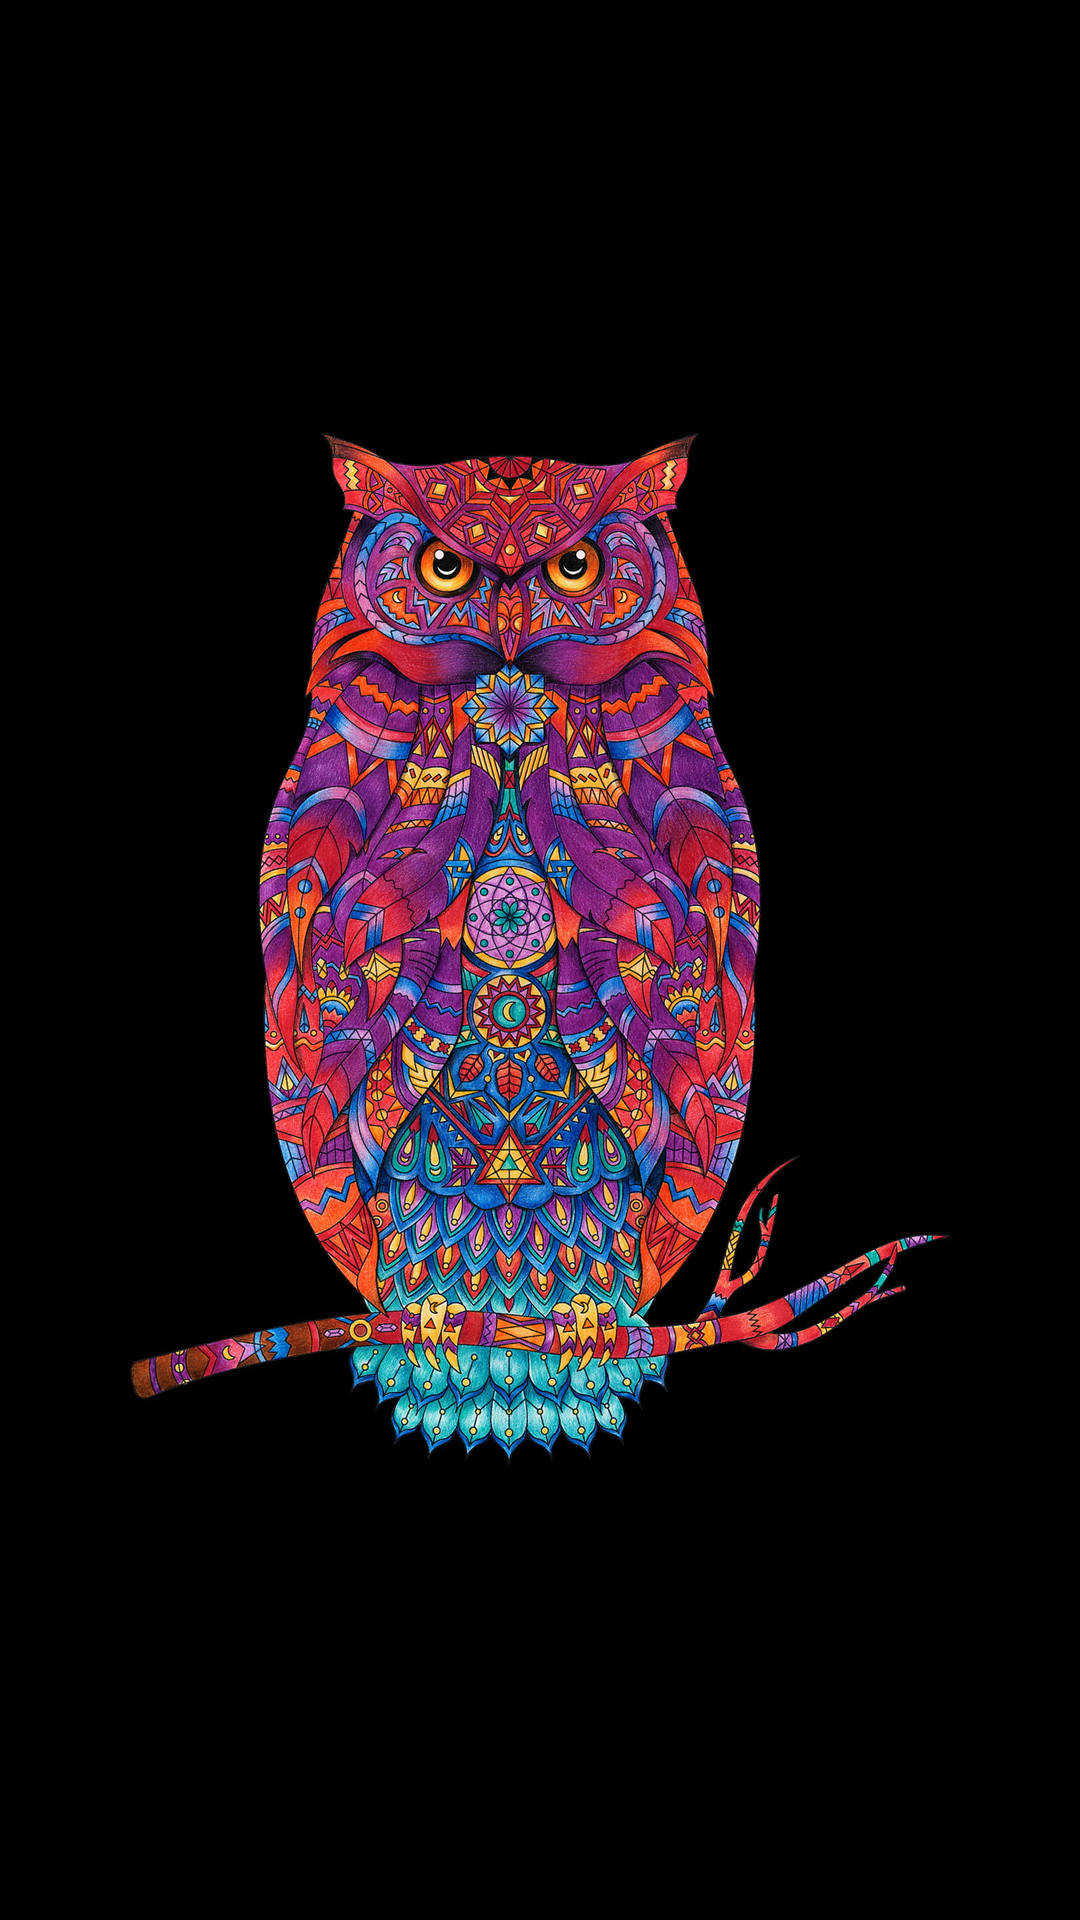 Caption: Stunning And Colorful Owl Hd Tattoo Art Image